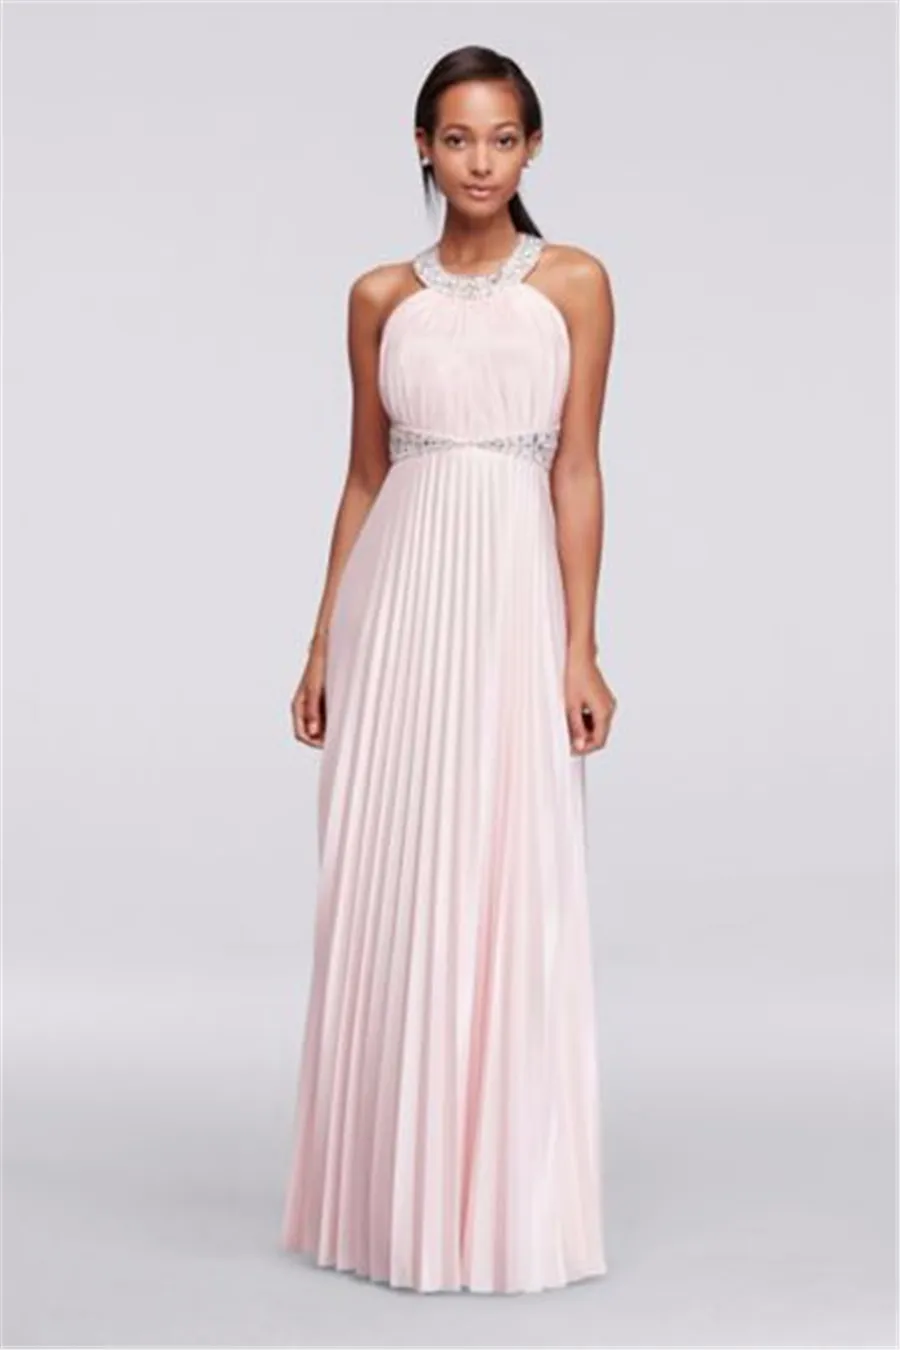 Beaded Strappy Back Halter Neckline Pink Bridesmaid Dresses with Pleats 2275SK8SD Wedding Party Dress Evening Dress Formal Dresses